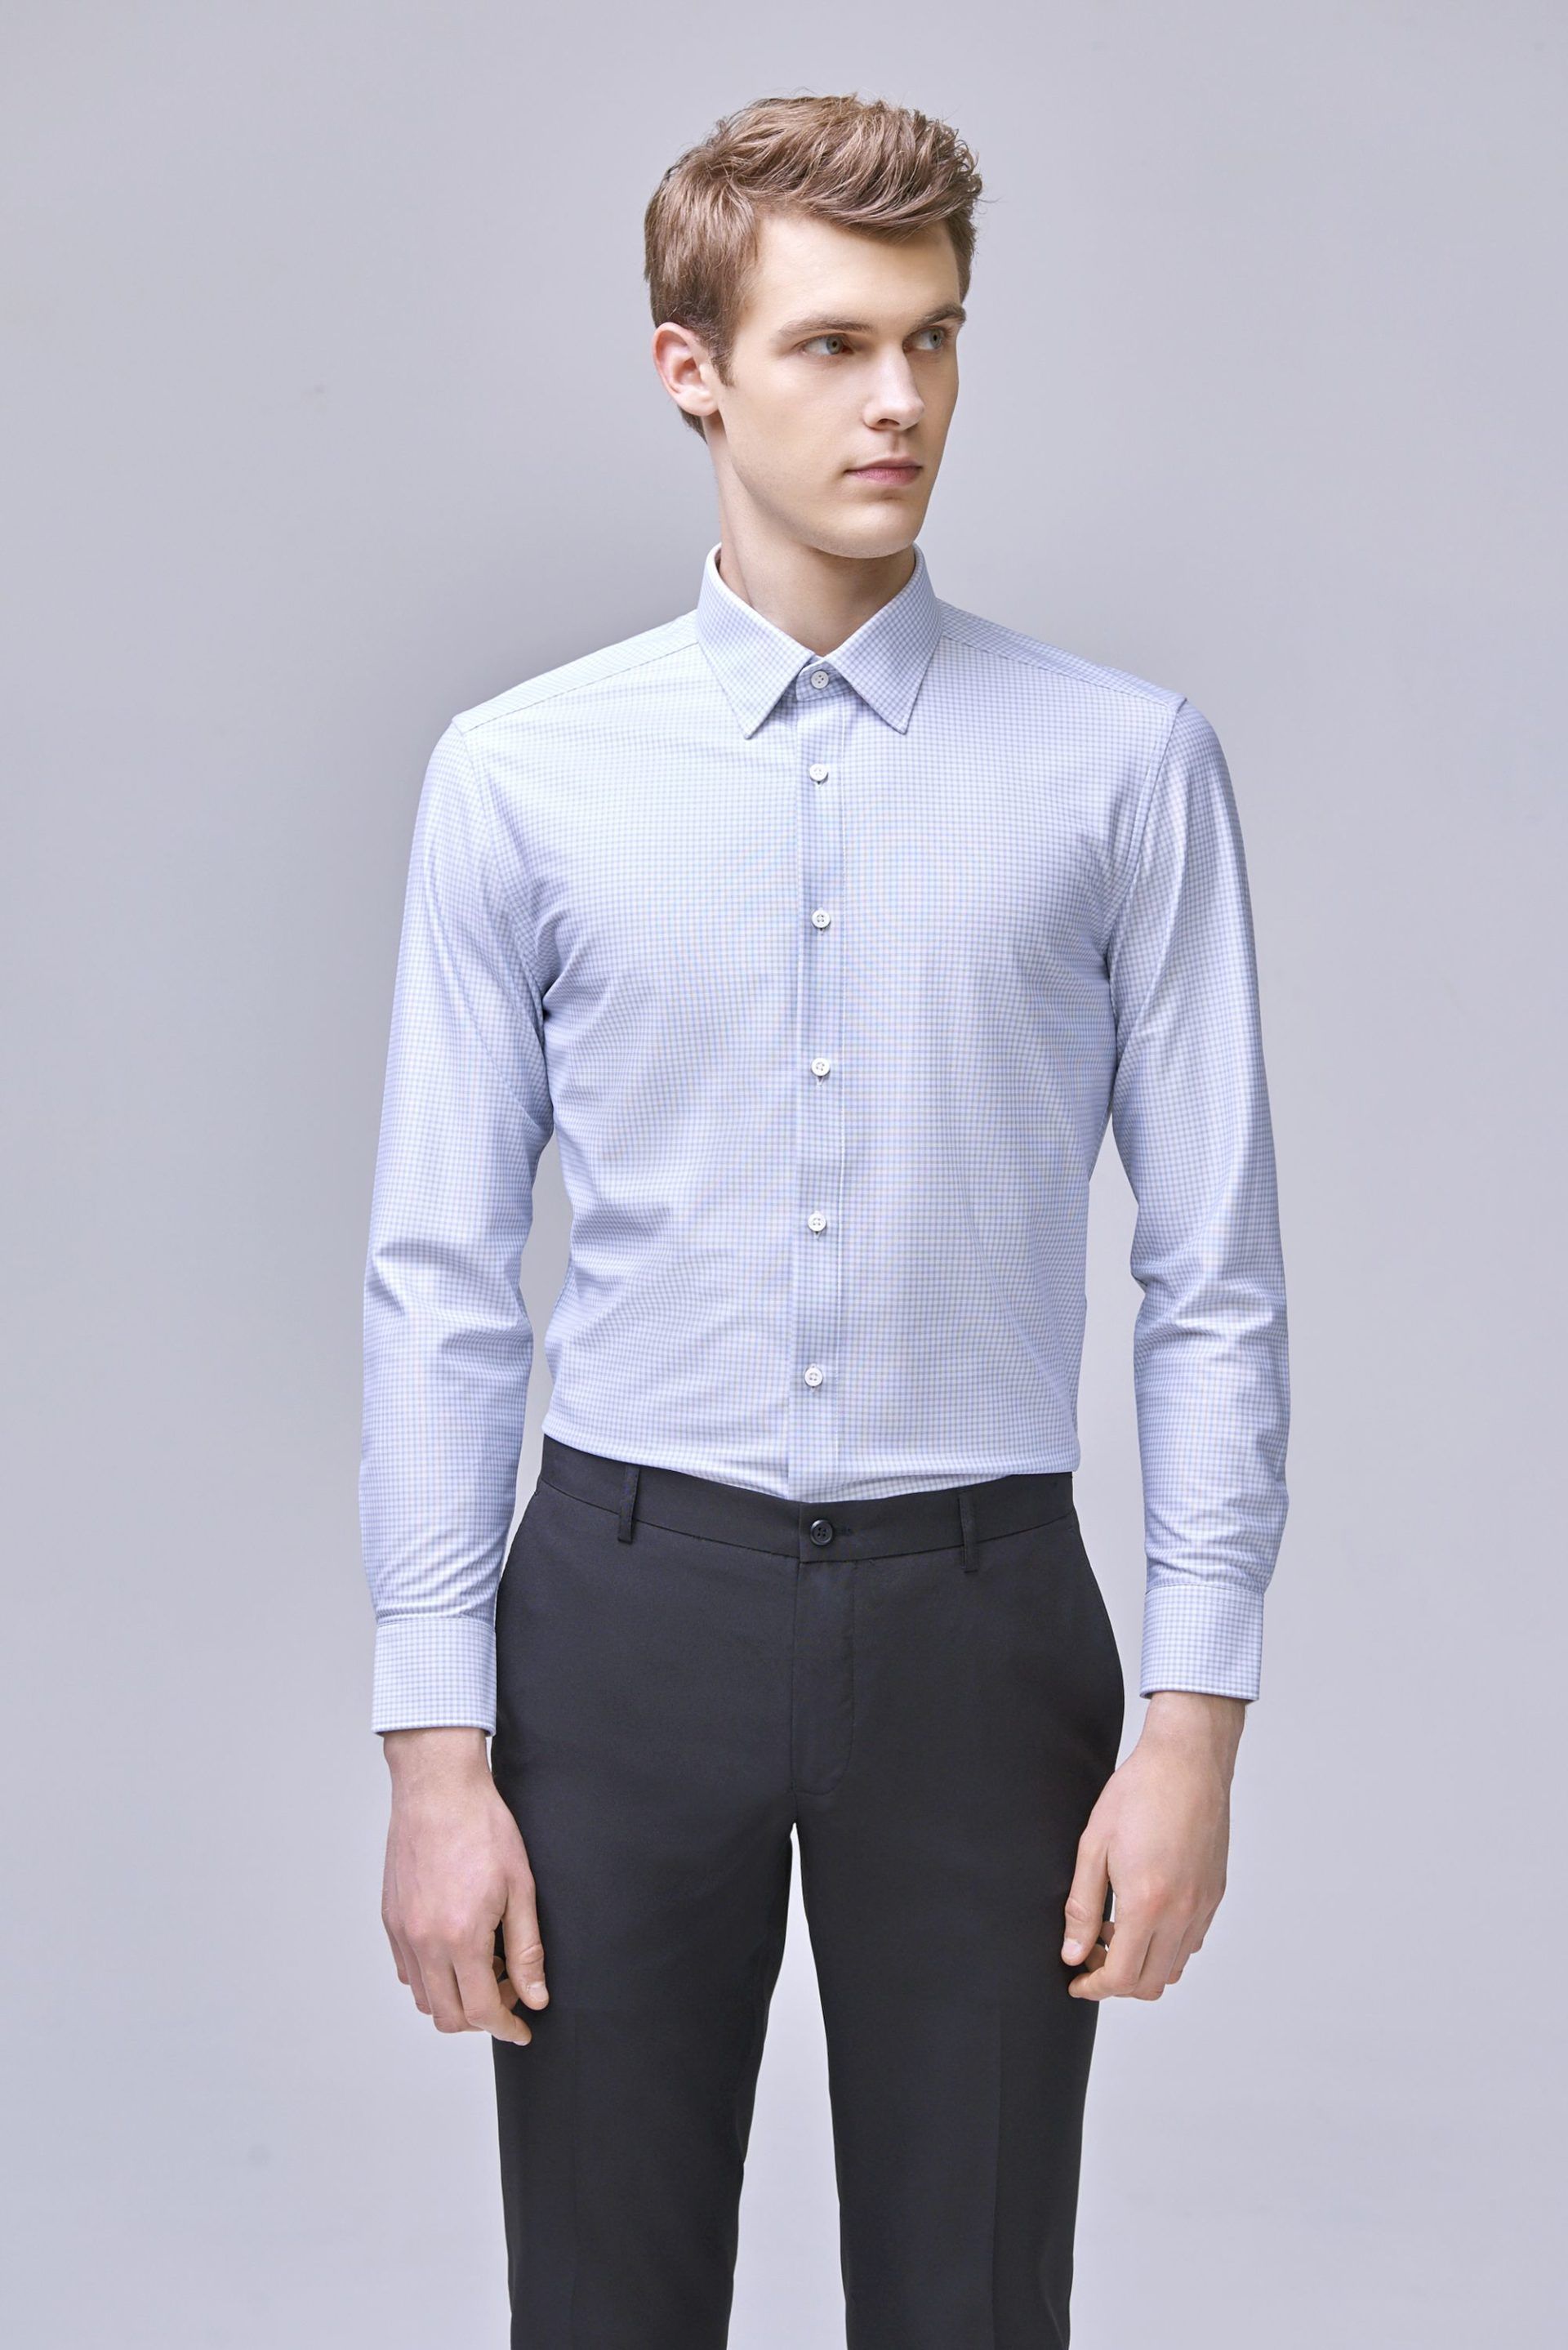 Upgrade your work wardrobe with G2000 high-tech dress shirts